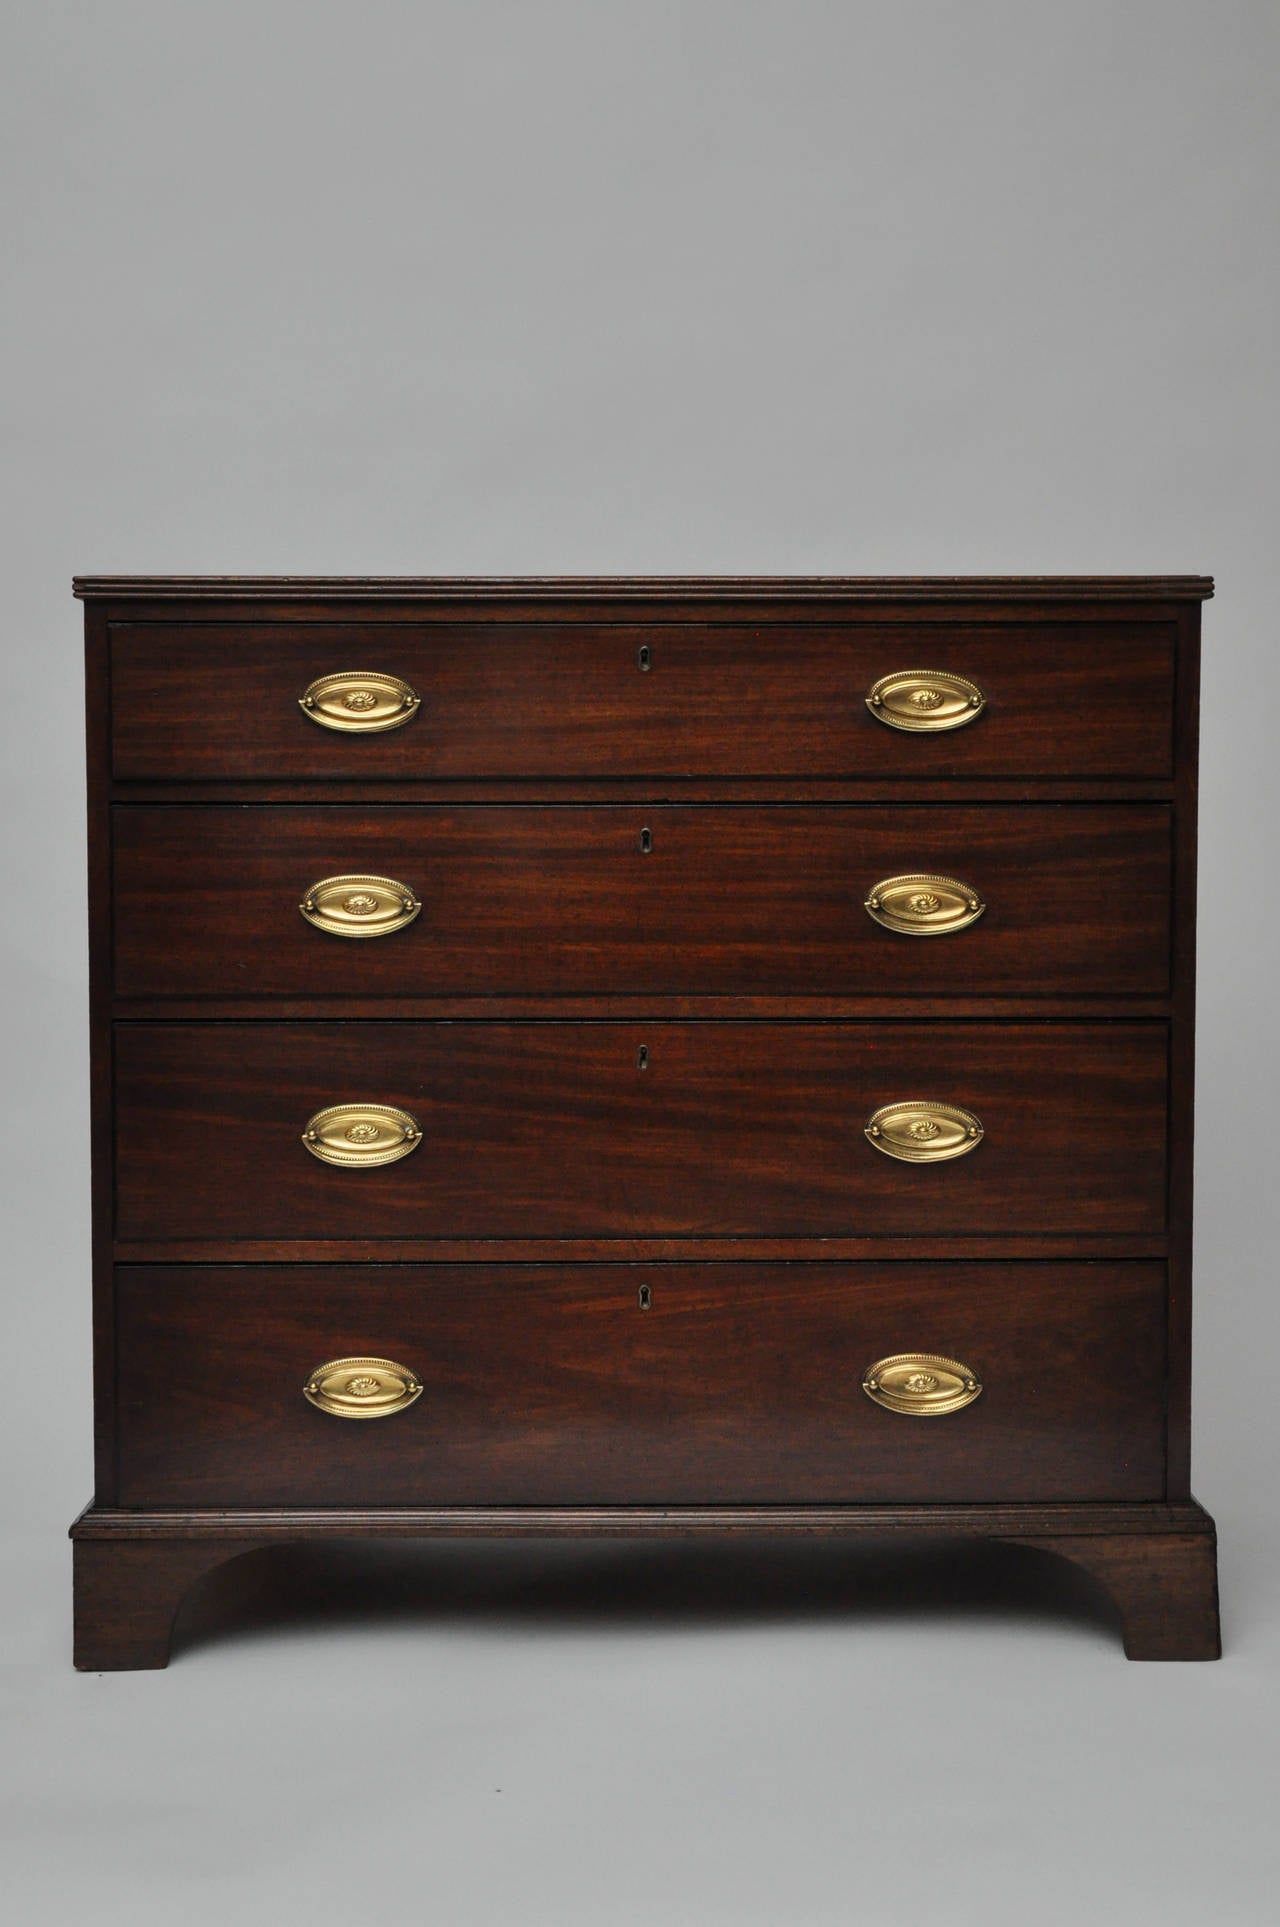 Early 19th century George III mahogany chest of drawers with applied, reeded molding to top and four graduated ebonized draw-front drawers with trim.